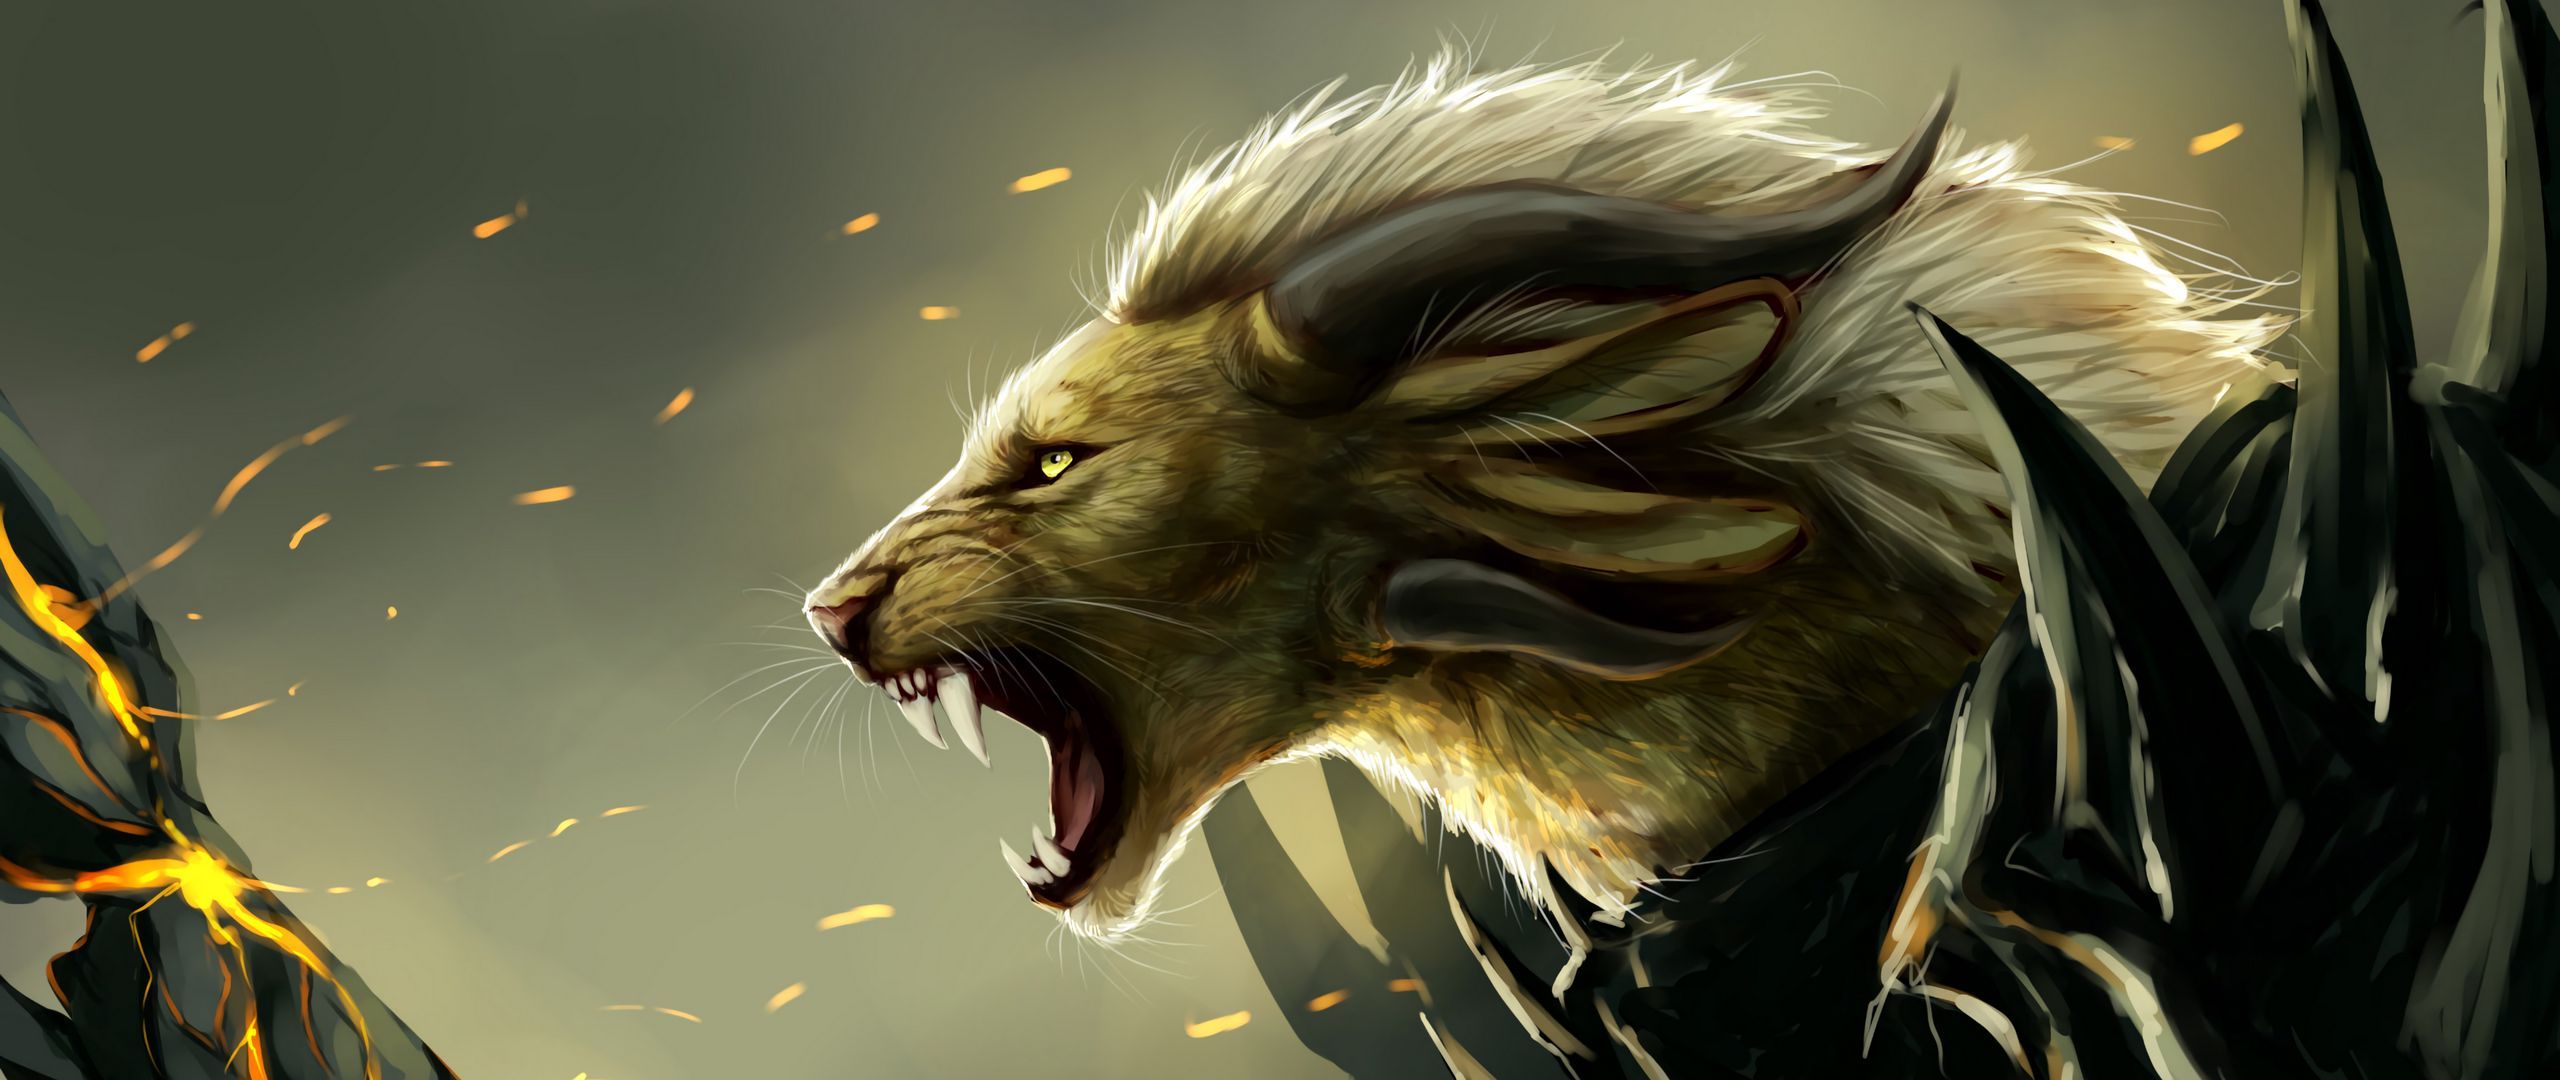 Download wallpaper 2560x1080 lion, grin, art, predator, fabulous, creature, mythical dual wide 1080p HD background